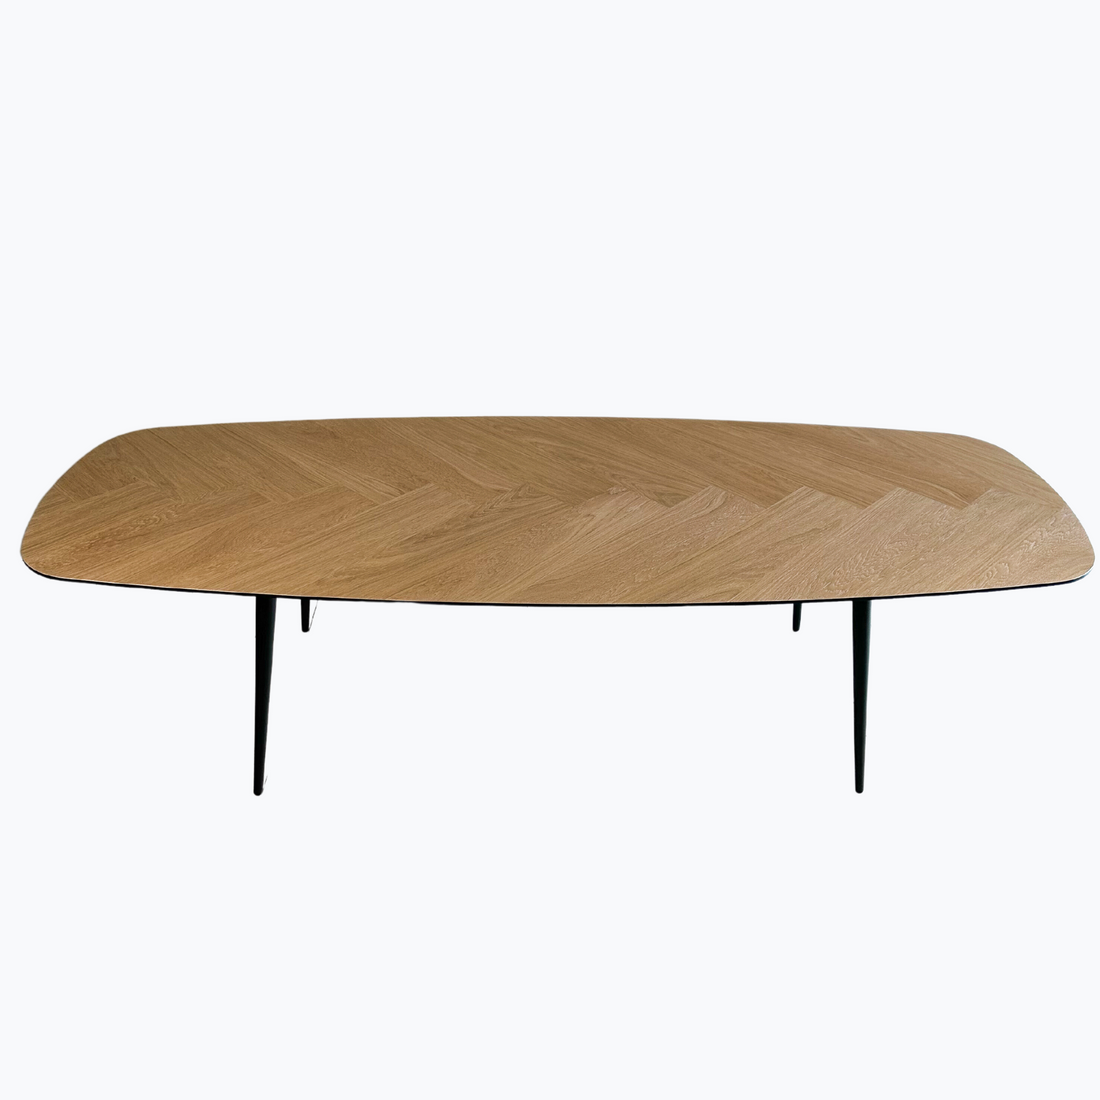  Oval Tables